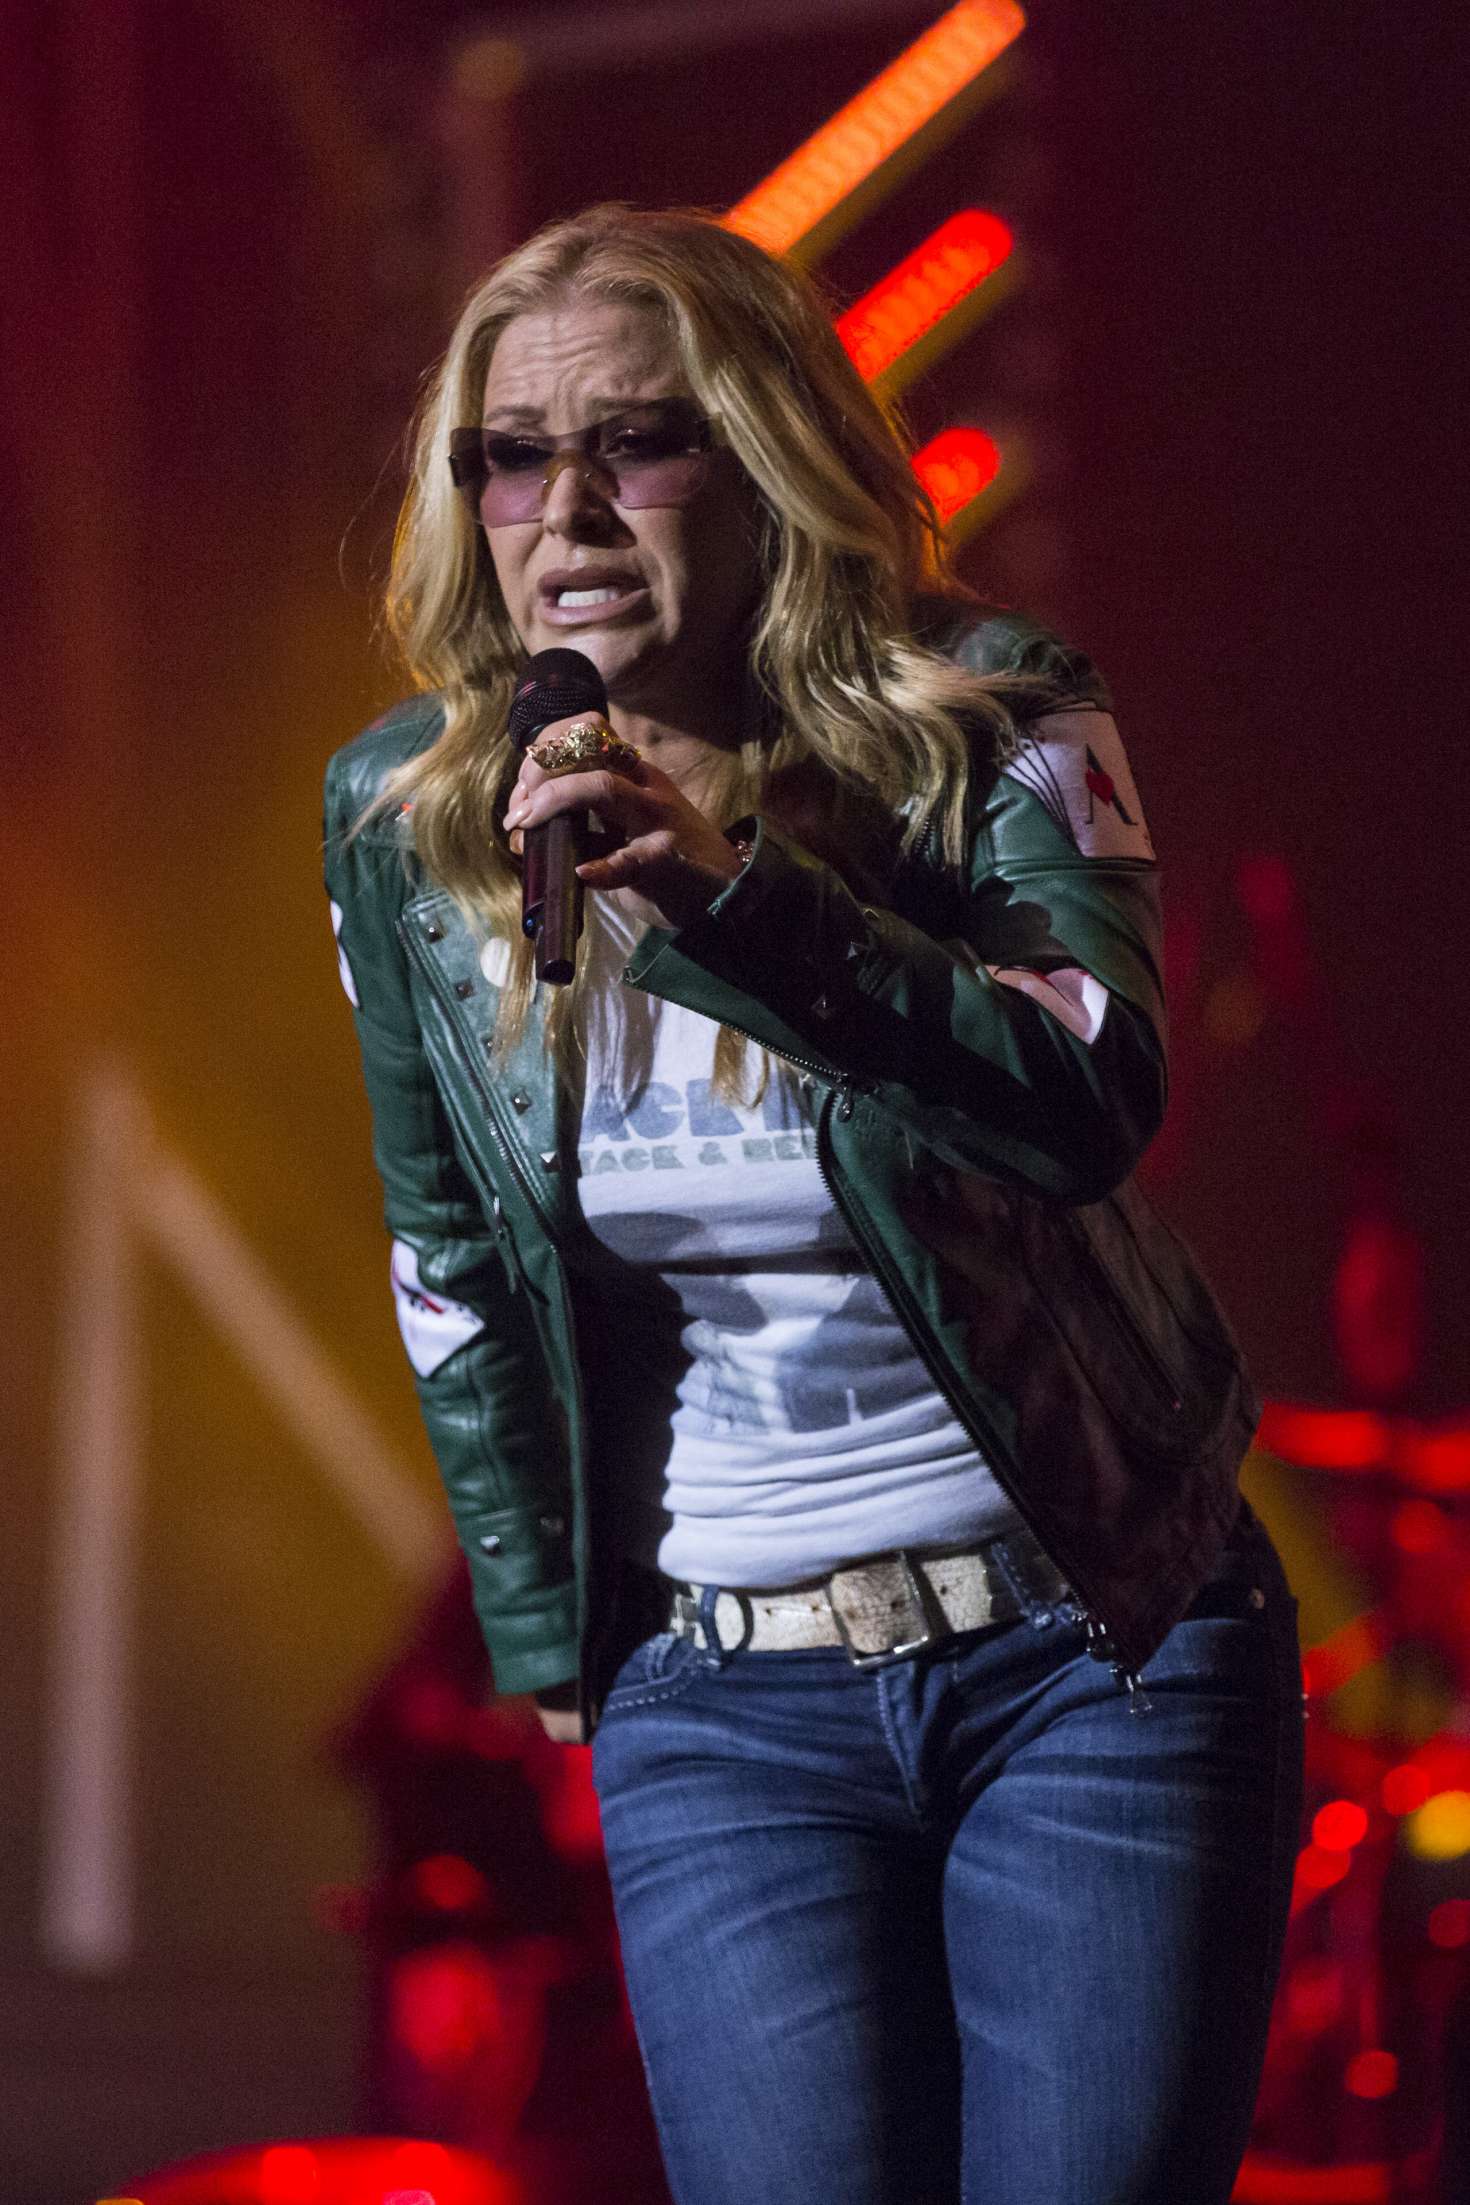 Anastacia - Performs at Manchester Apollo in Manchester